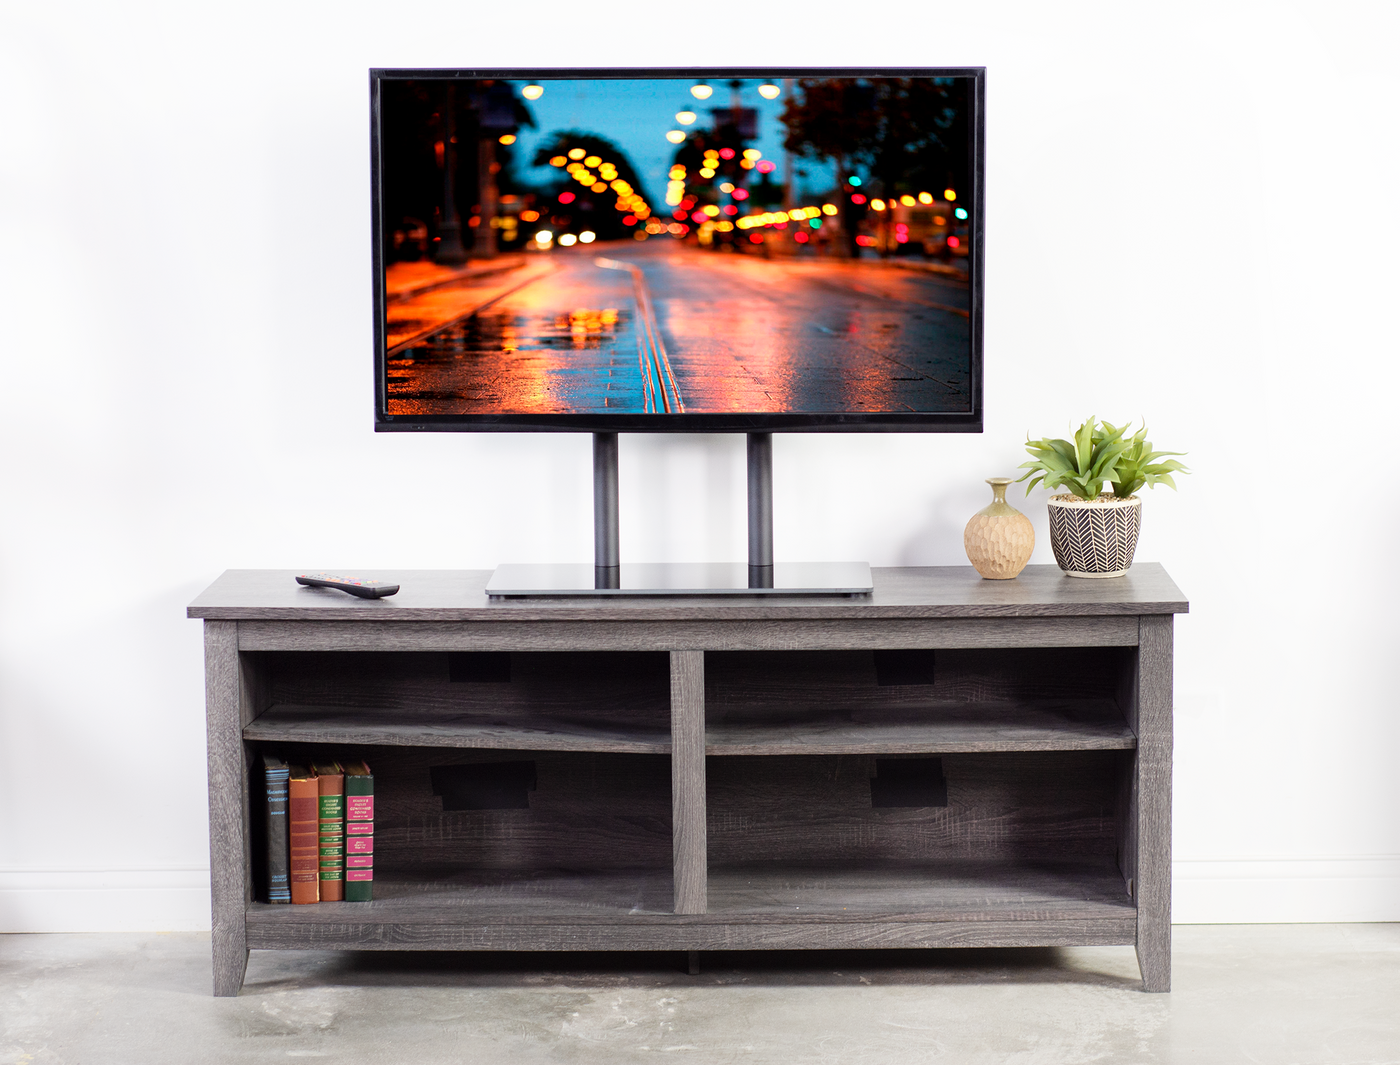 Heavy-duty tabletop TV stand.